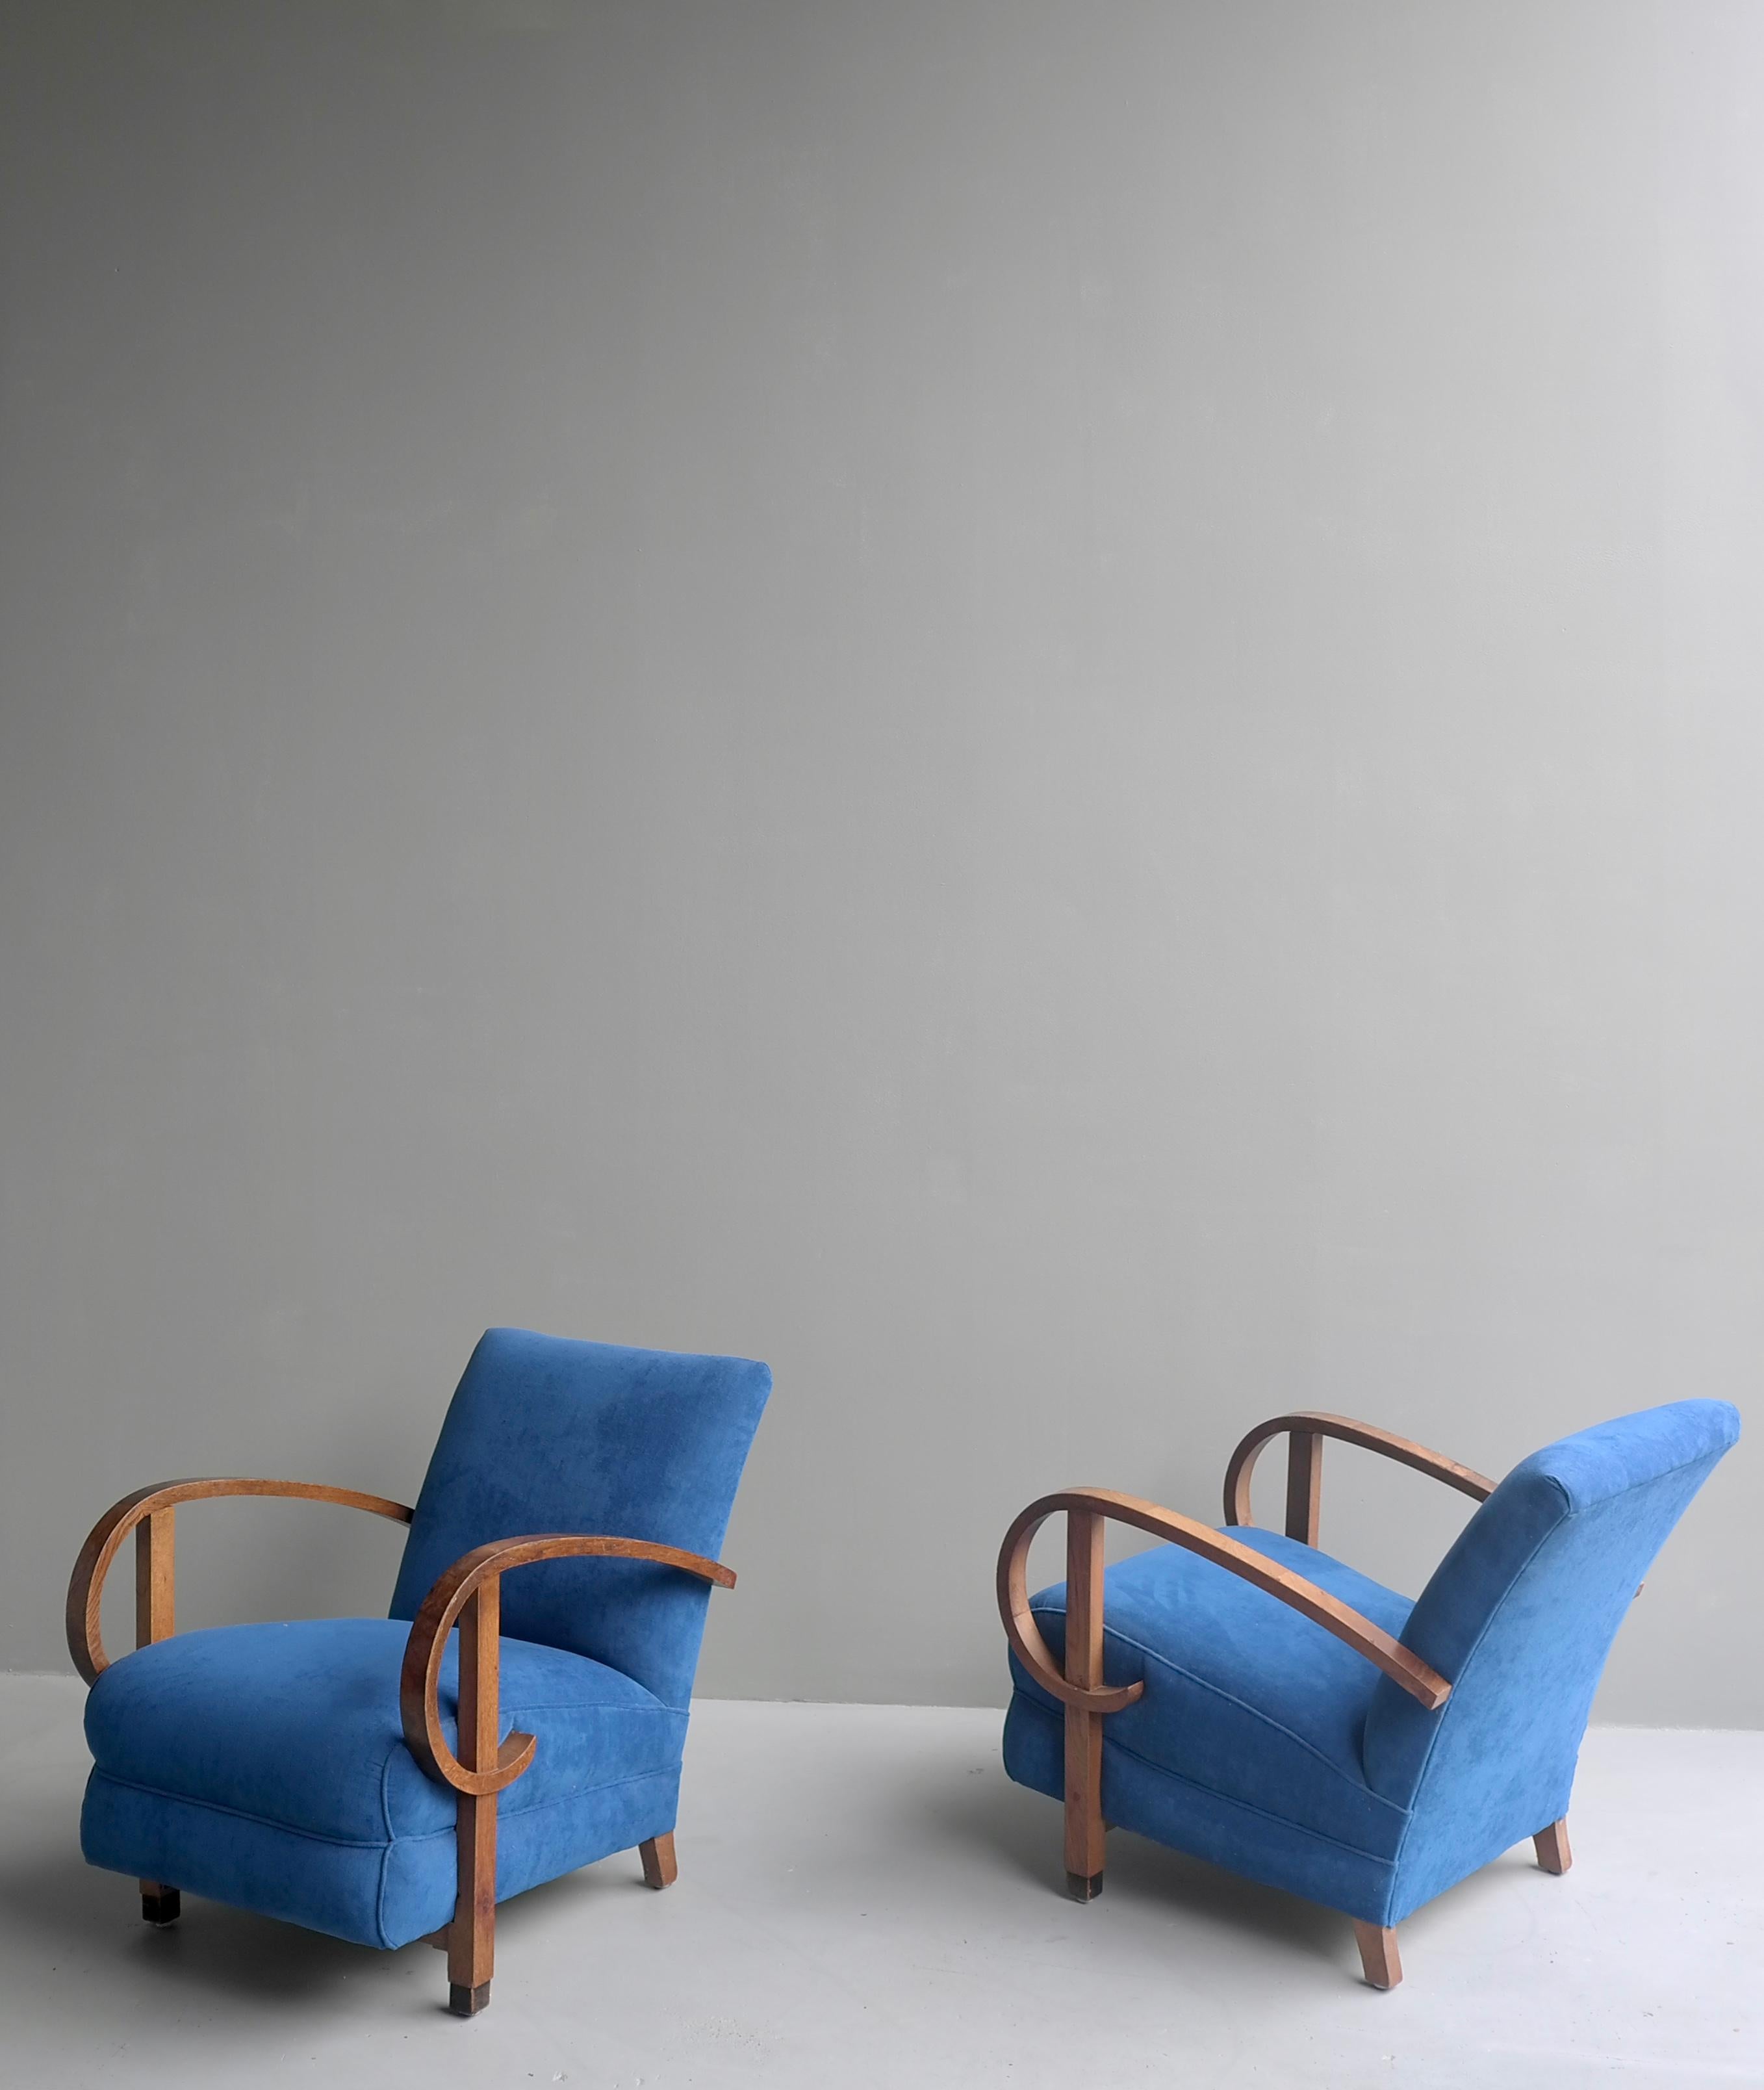 Pair of Sculptural Curved Walnut Deco Armchairs in Blue Fabric, France, 1940s 1